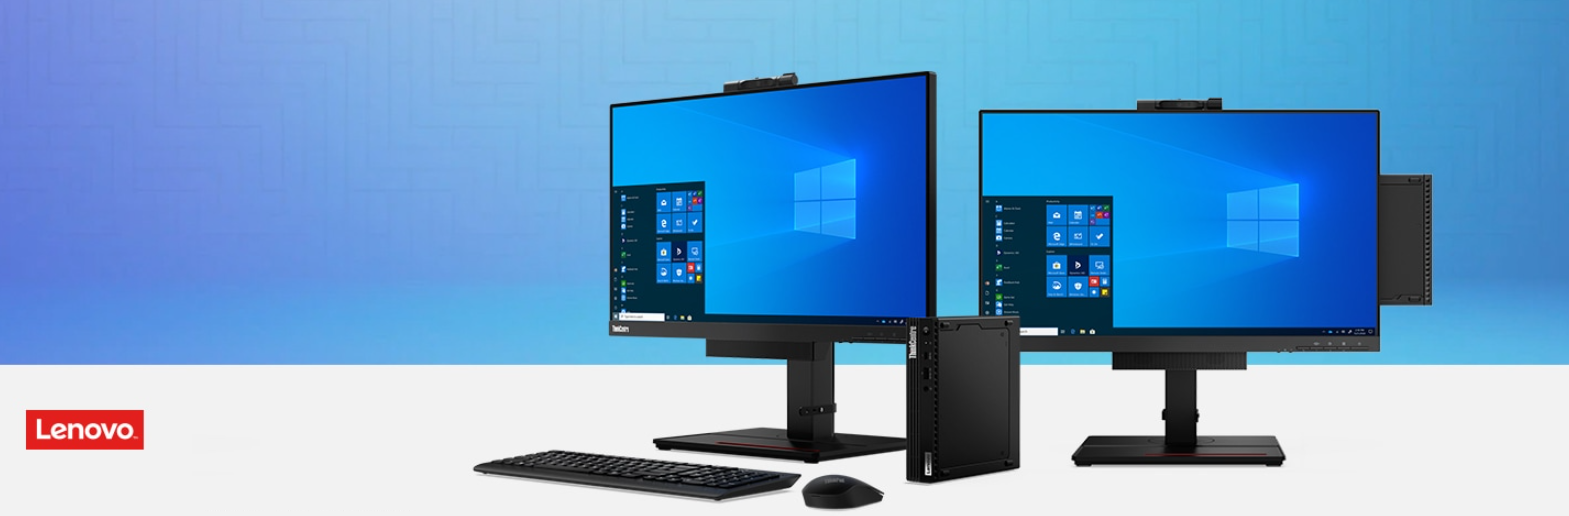 lenovo all in one itzoo